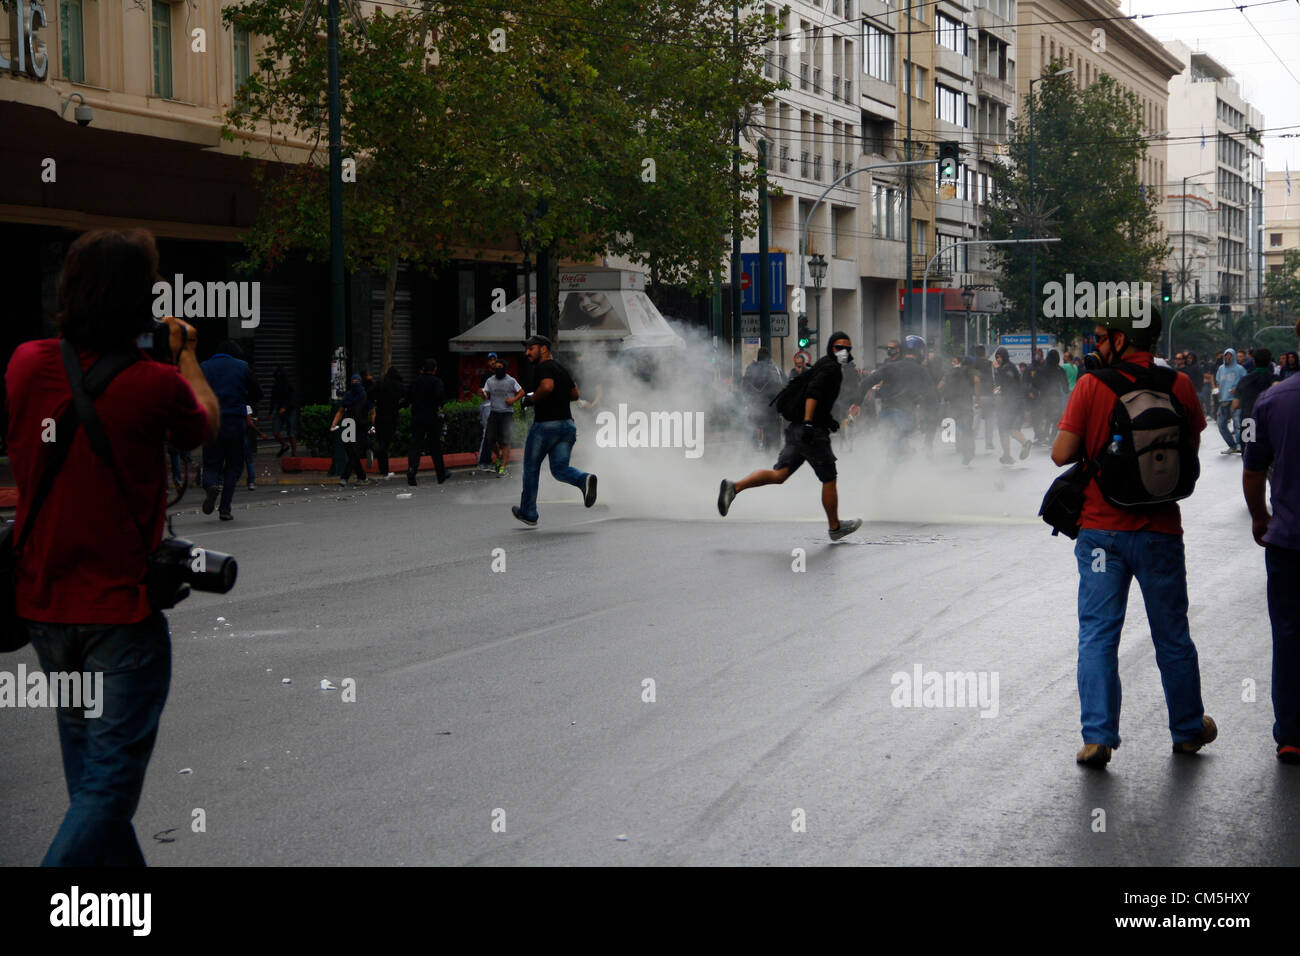 Athens, Greece. 9th October 2012. A tear gas bomb explodes among the protesters. Violent clashes took place during an anti-Merkel protest as German Chancellor visited Athens in 9th October 2012. Stock Photo